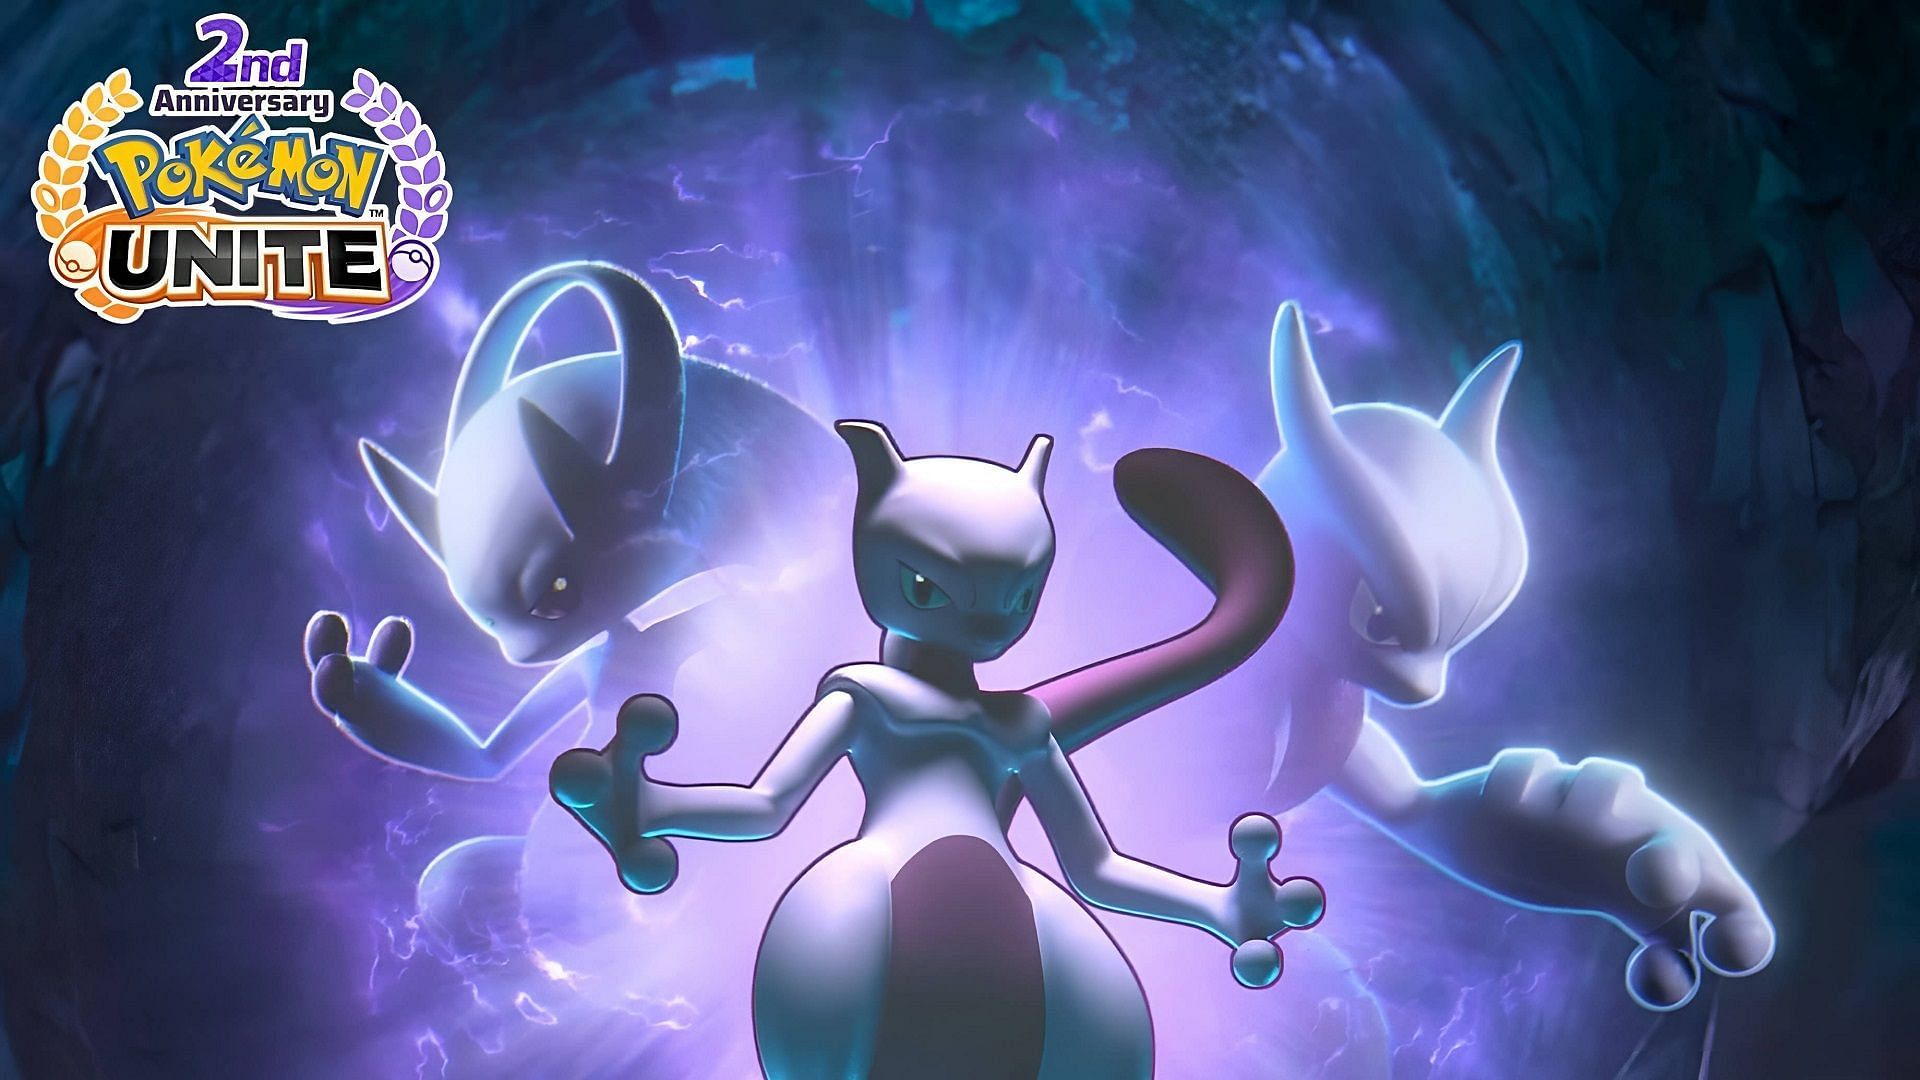 Mewtwo is arriving in Pokemon Unite with two distinct licenses based on its Mega Evolutions (Image via The Pokemon Company)